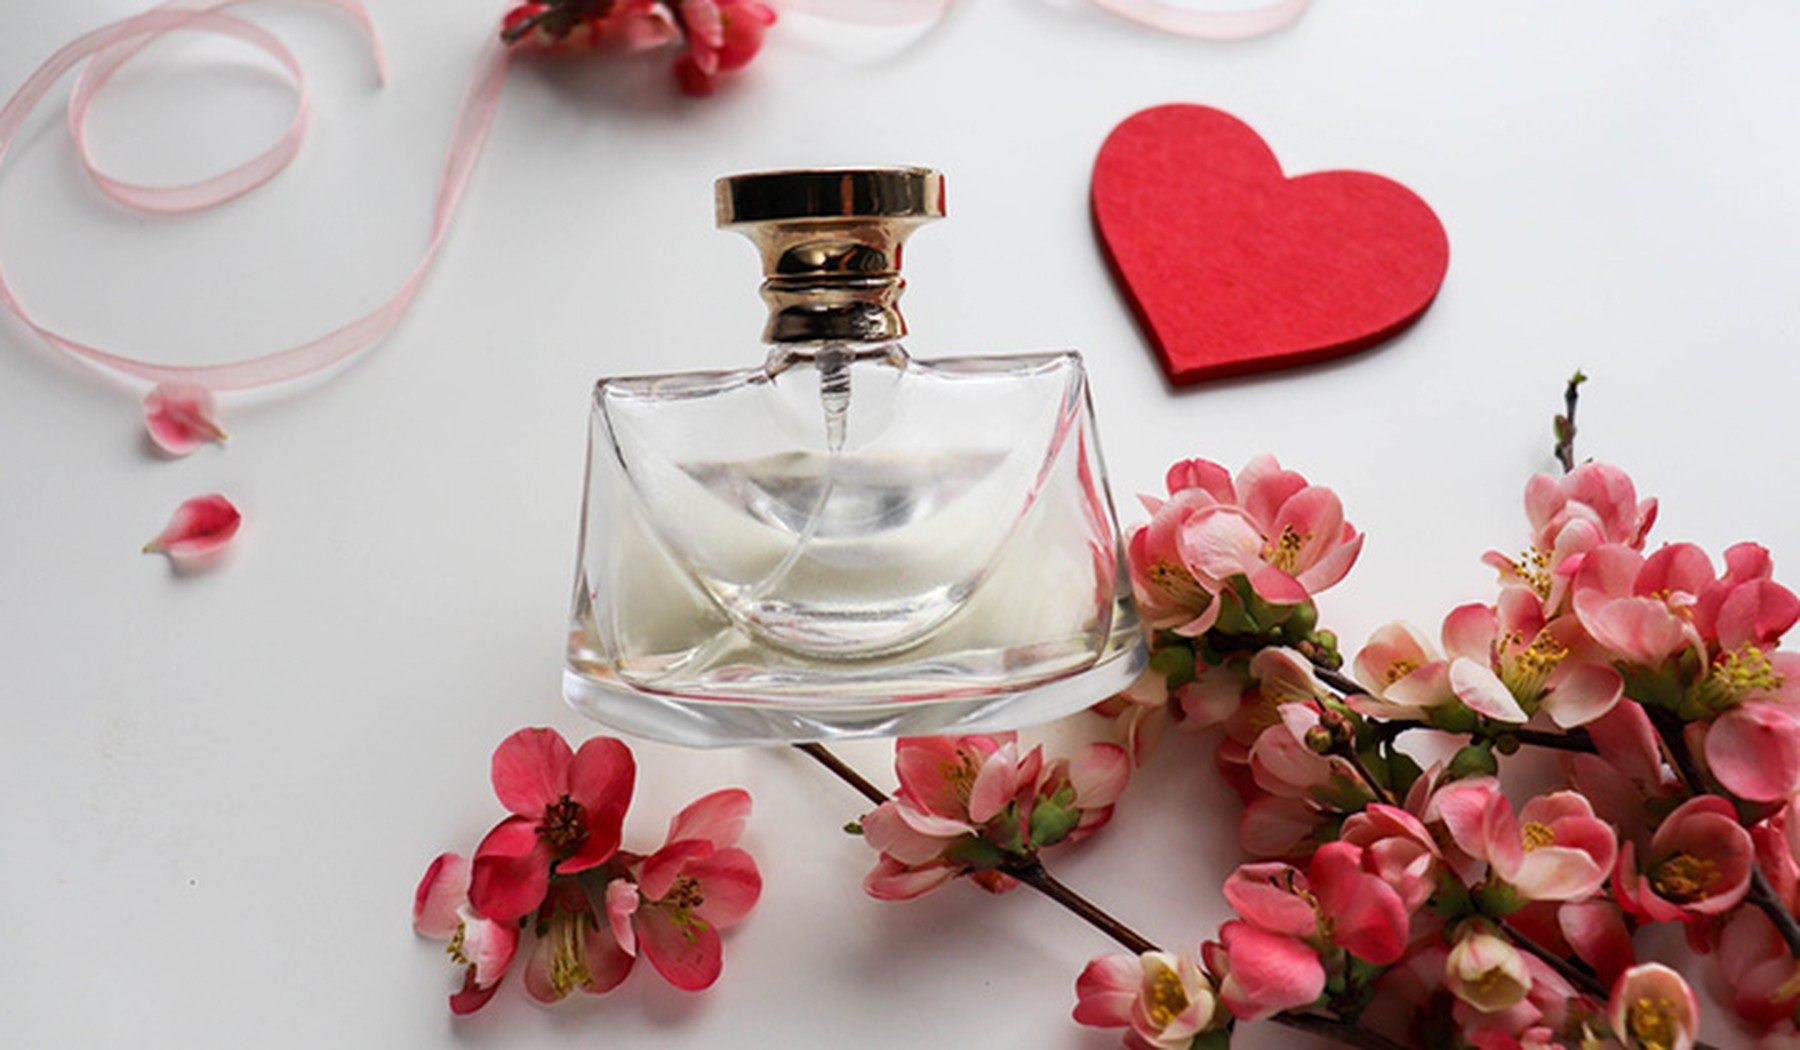 Perfume bottle in front of a red paper heart and pink flowers